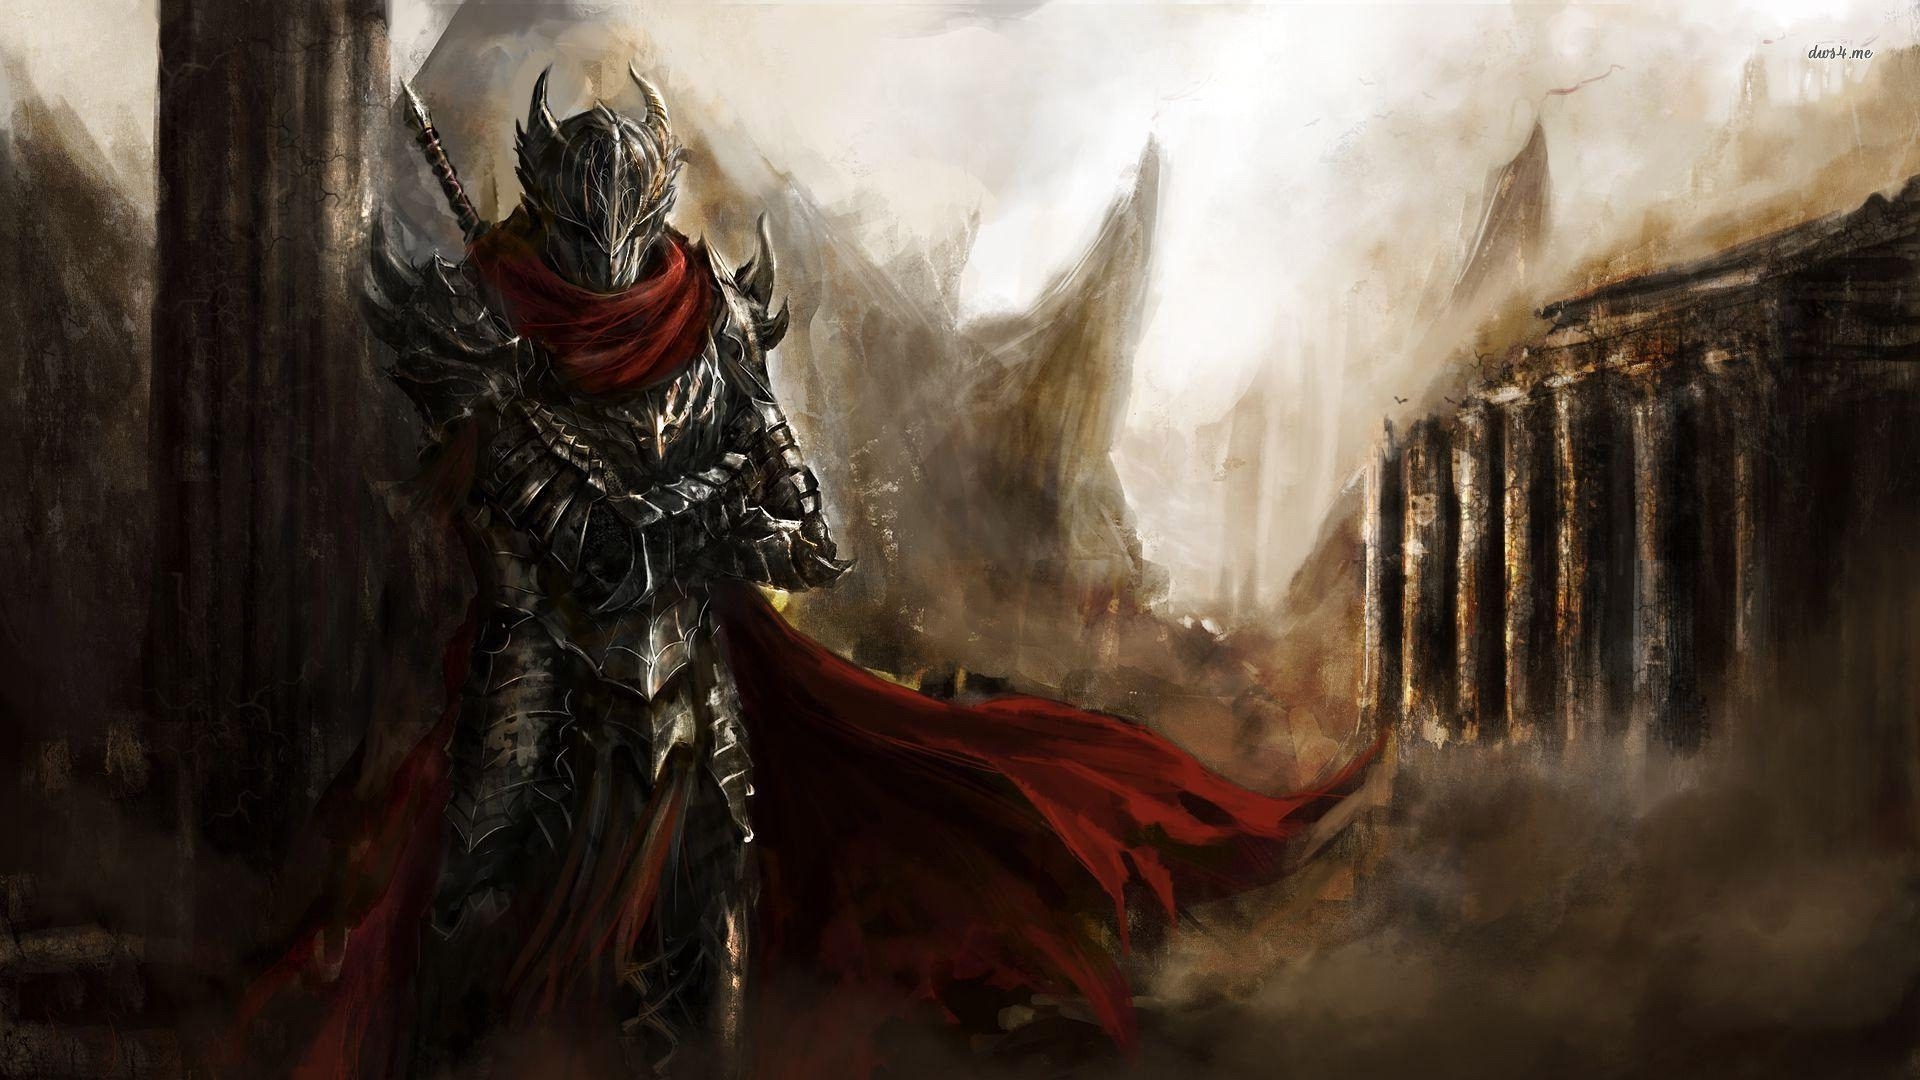 10 Latest Medieval Black Knight Wallpaper FULL HD 1080p For PC Background